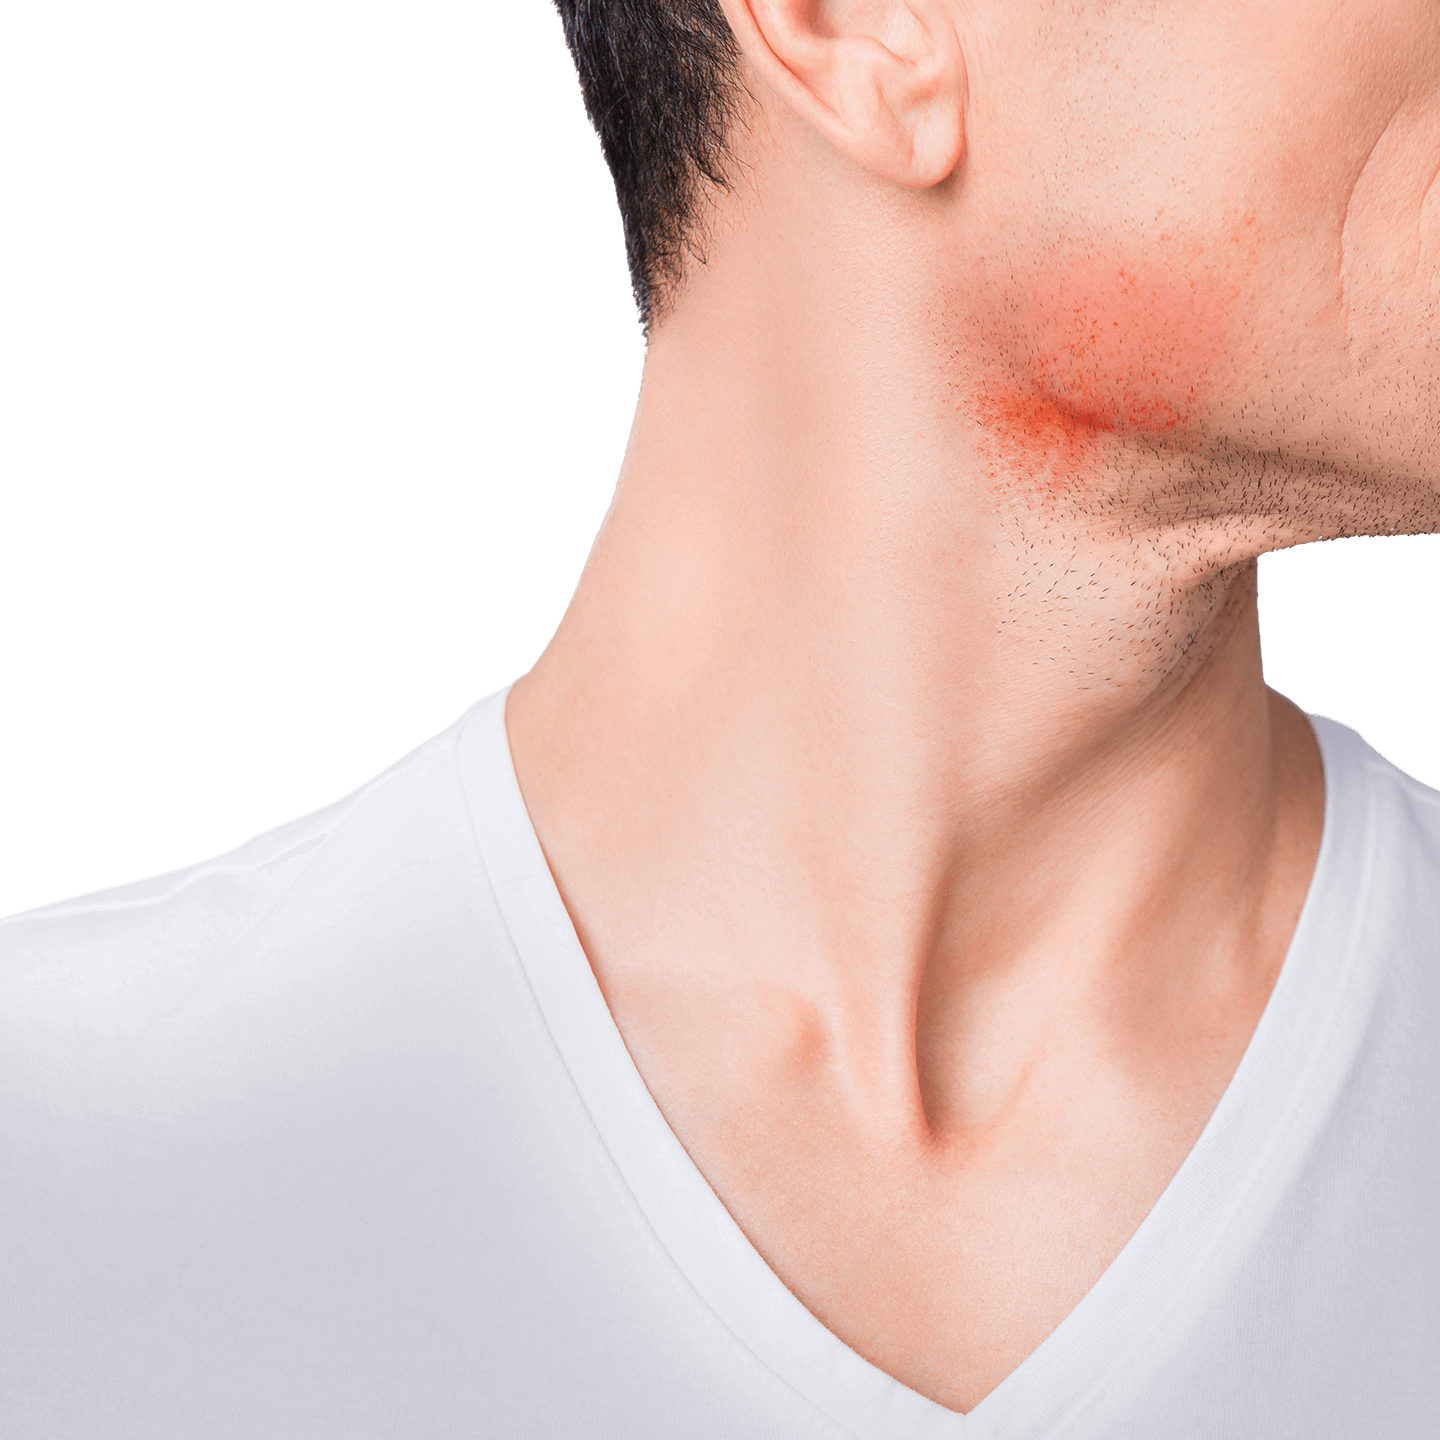 What causes shaving rash and how you can prevent it